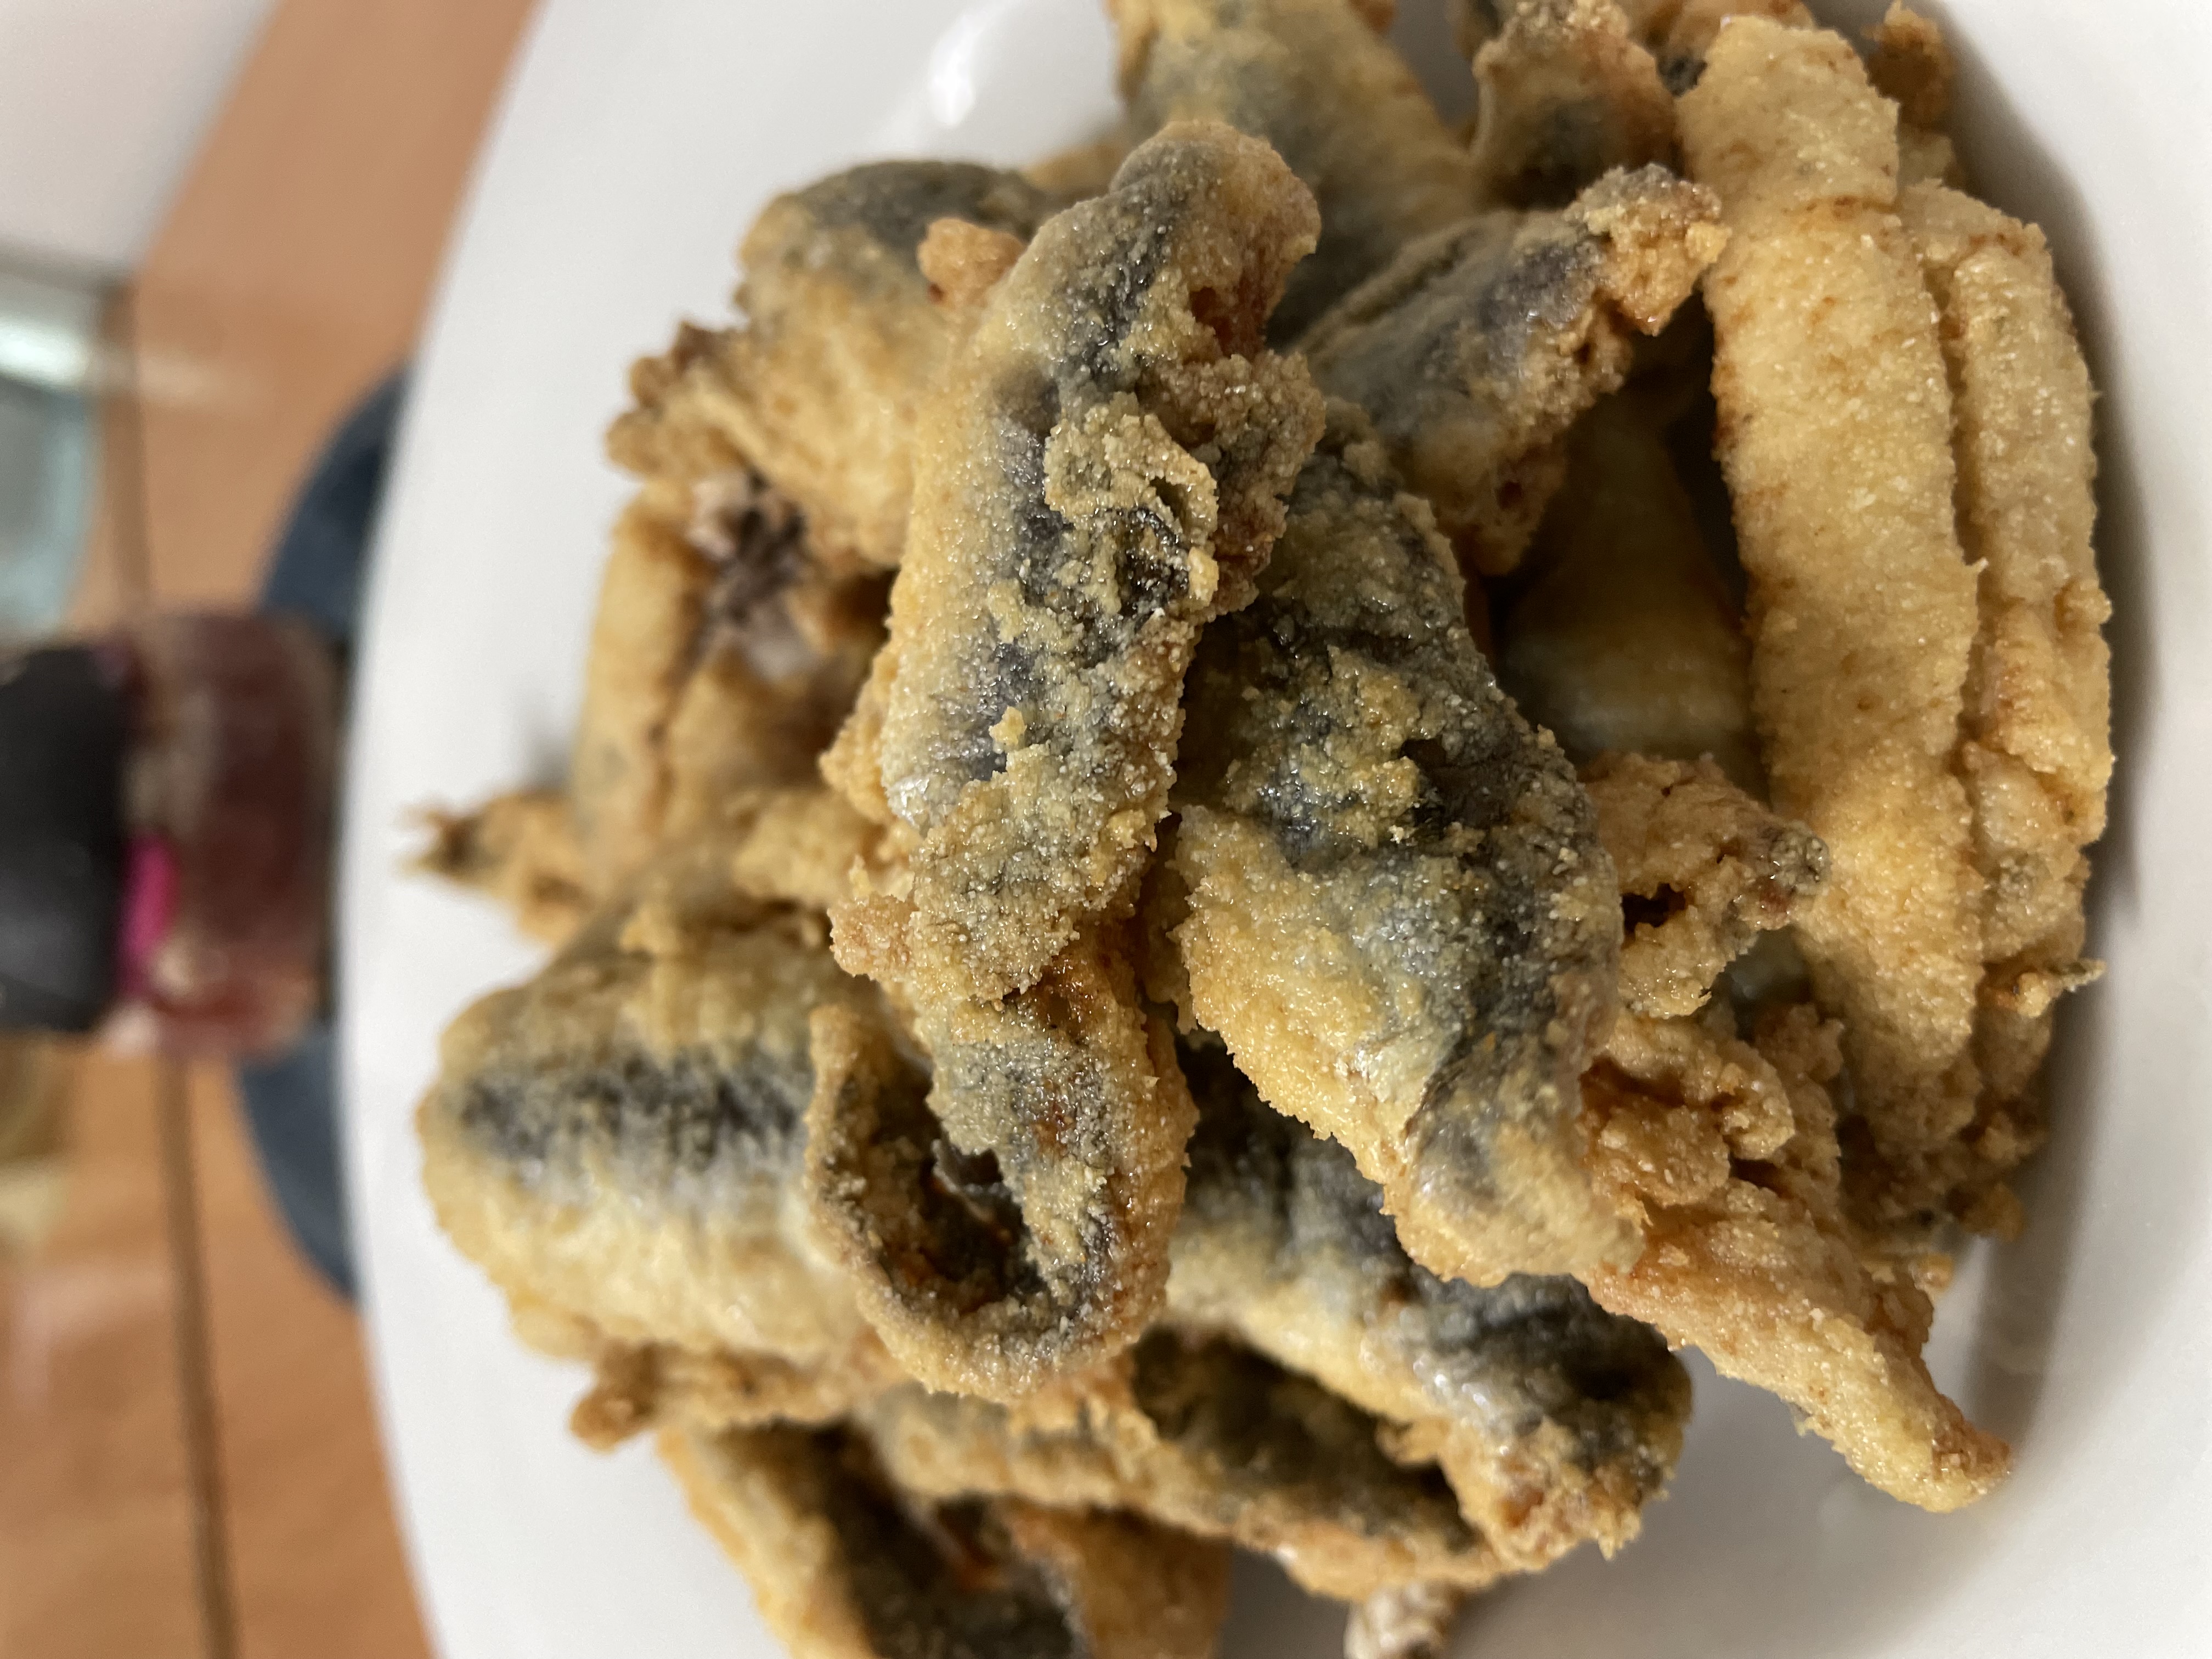 Fried anchovies with lemon